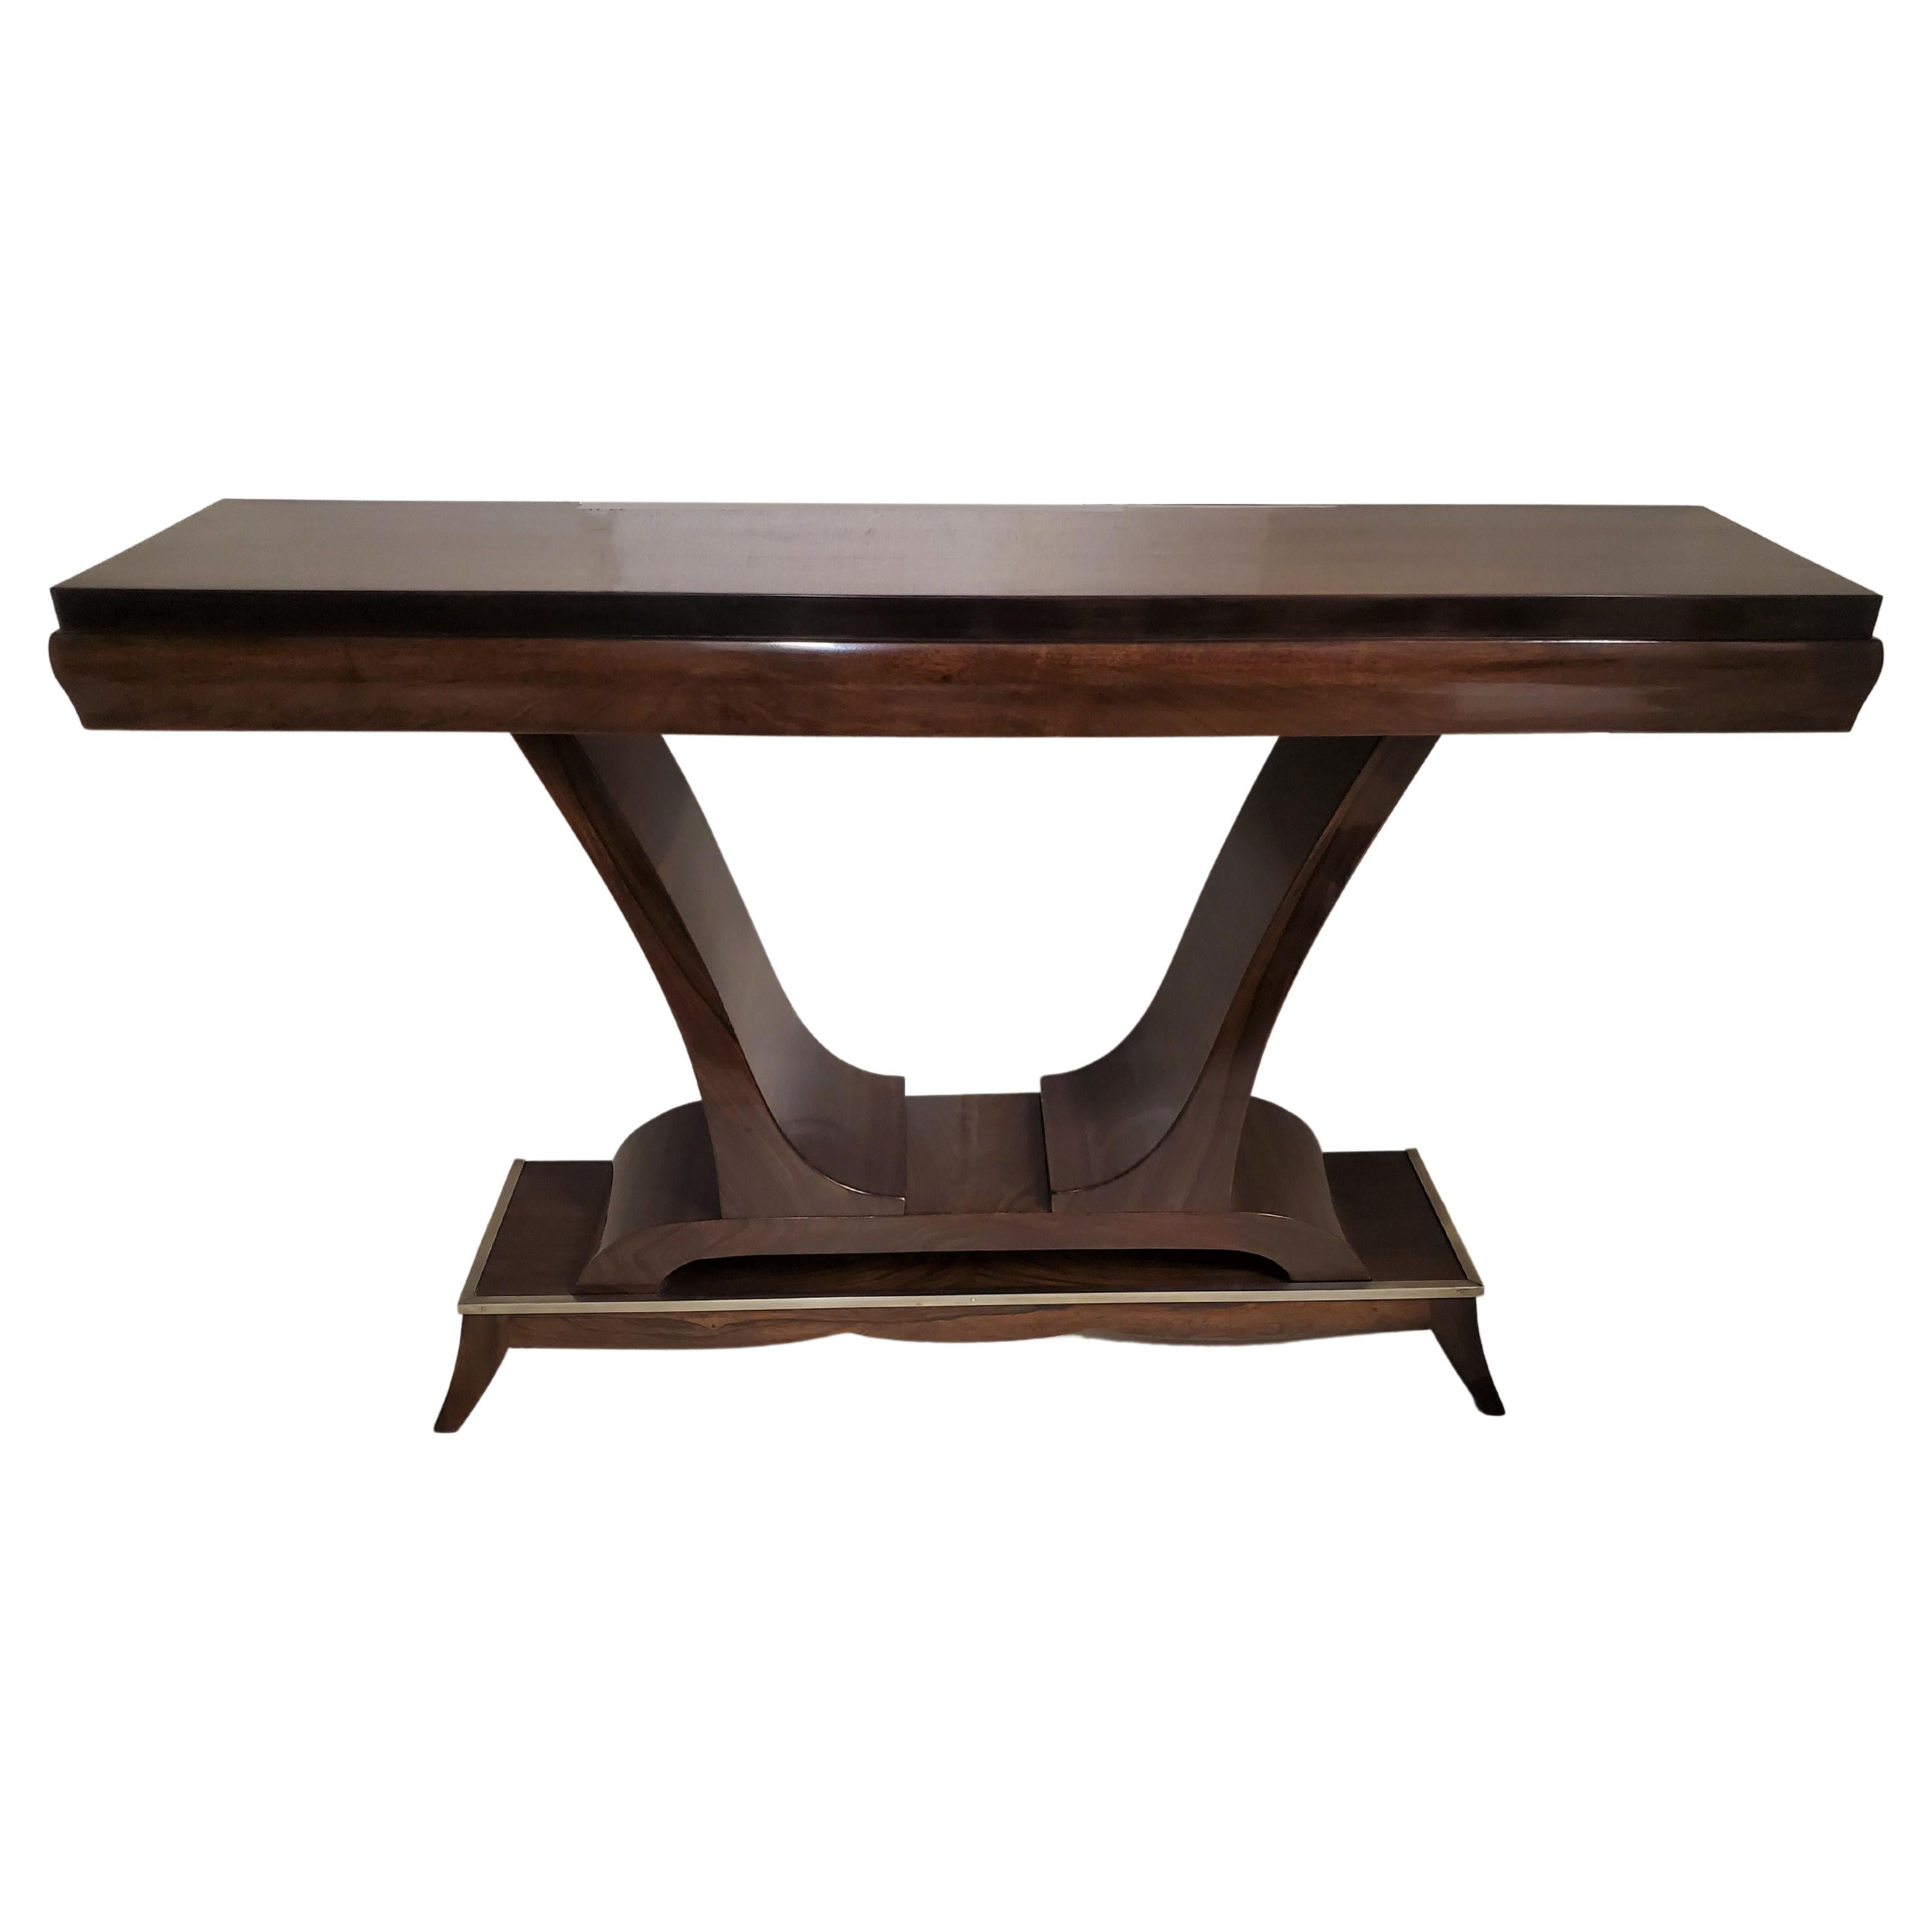  French Art Deco elegant palisander and walnut console with nickeled trim